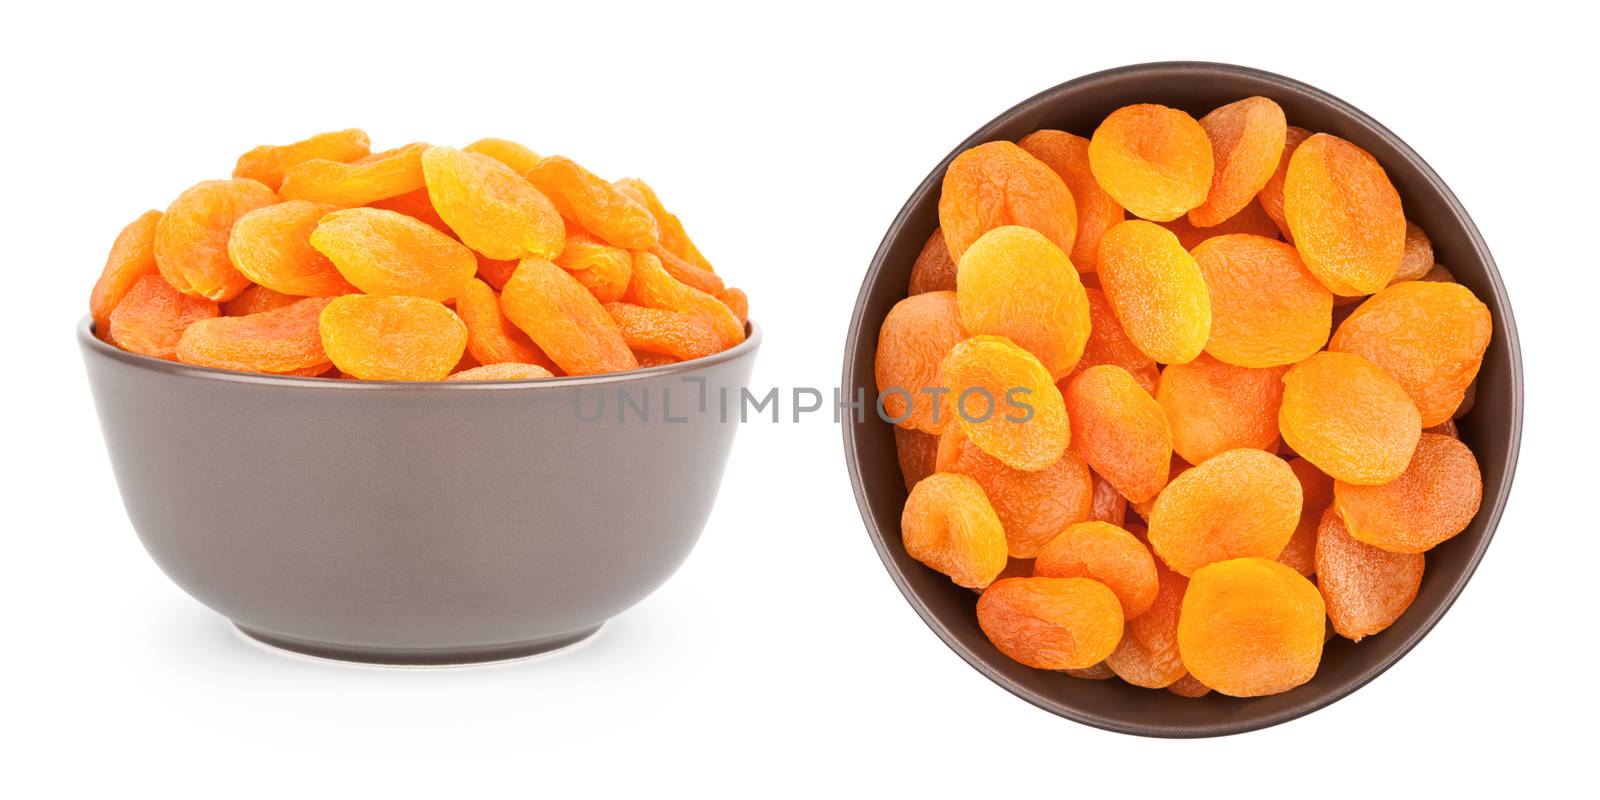 Sweet dried apricots in a ceramic bowl, side and top view